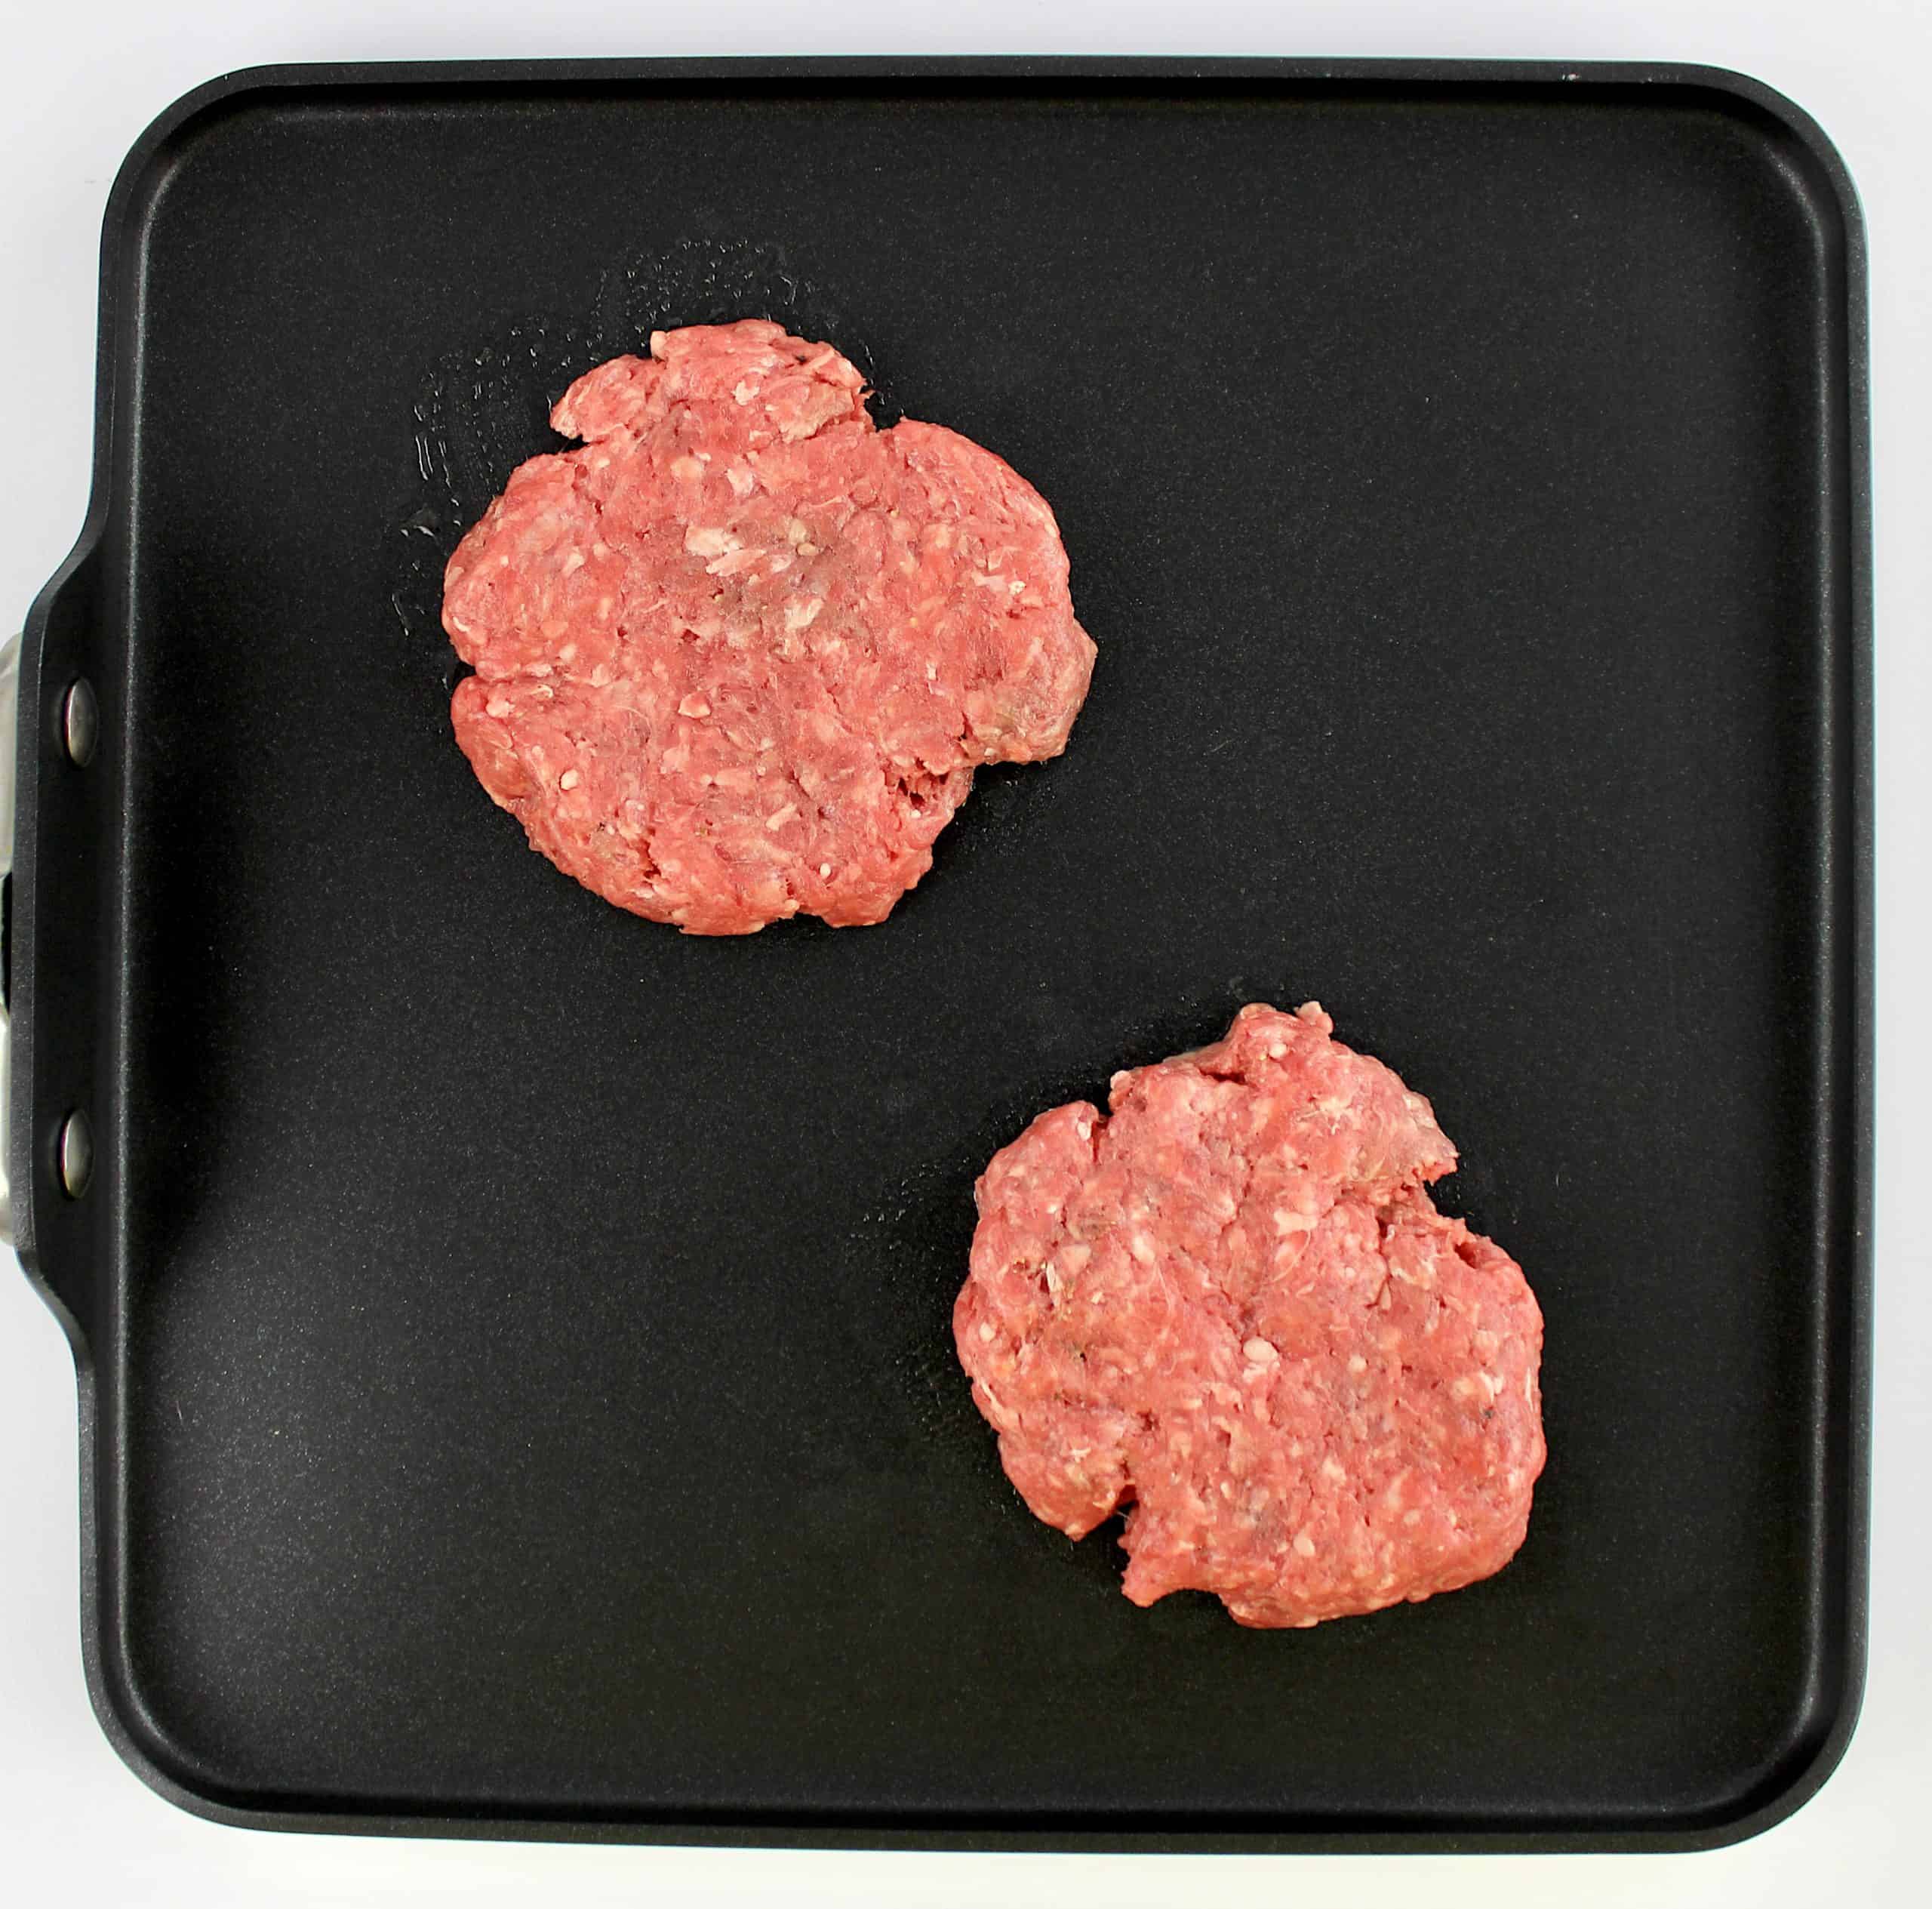 2 raw burger patties on griddle